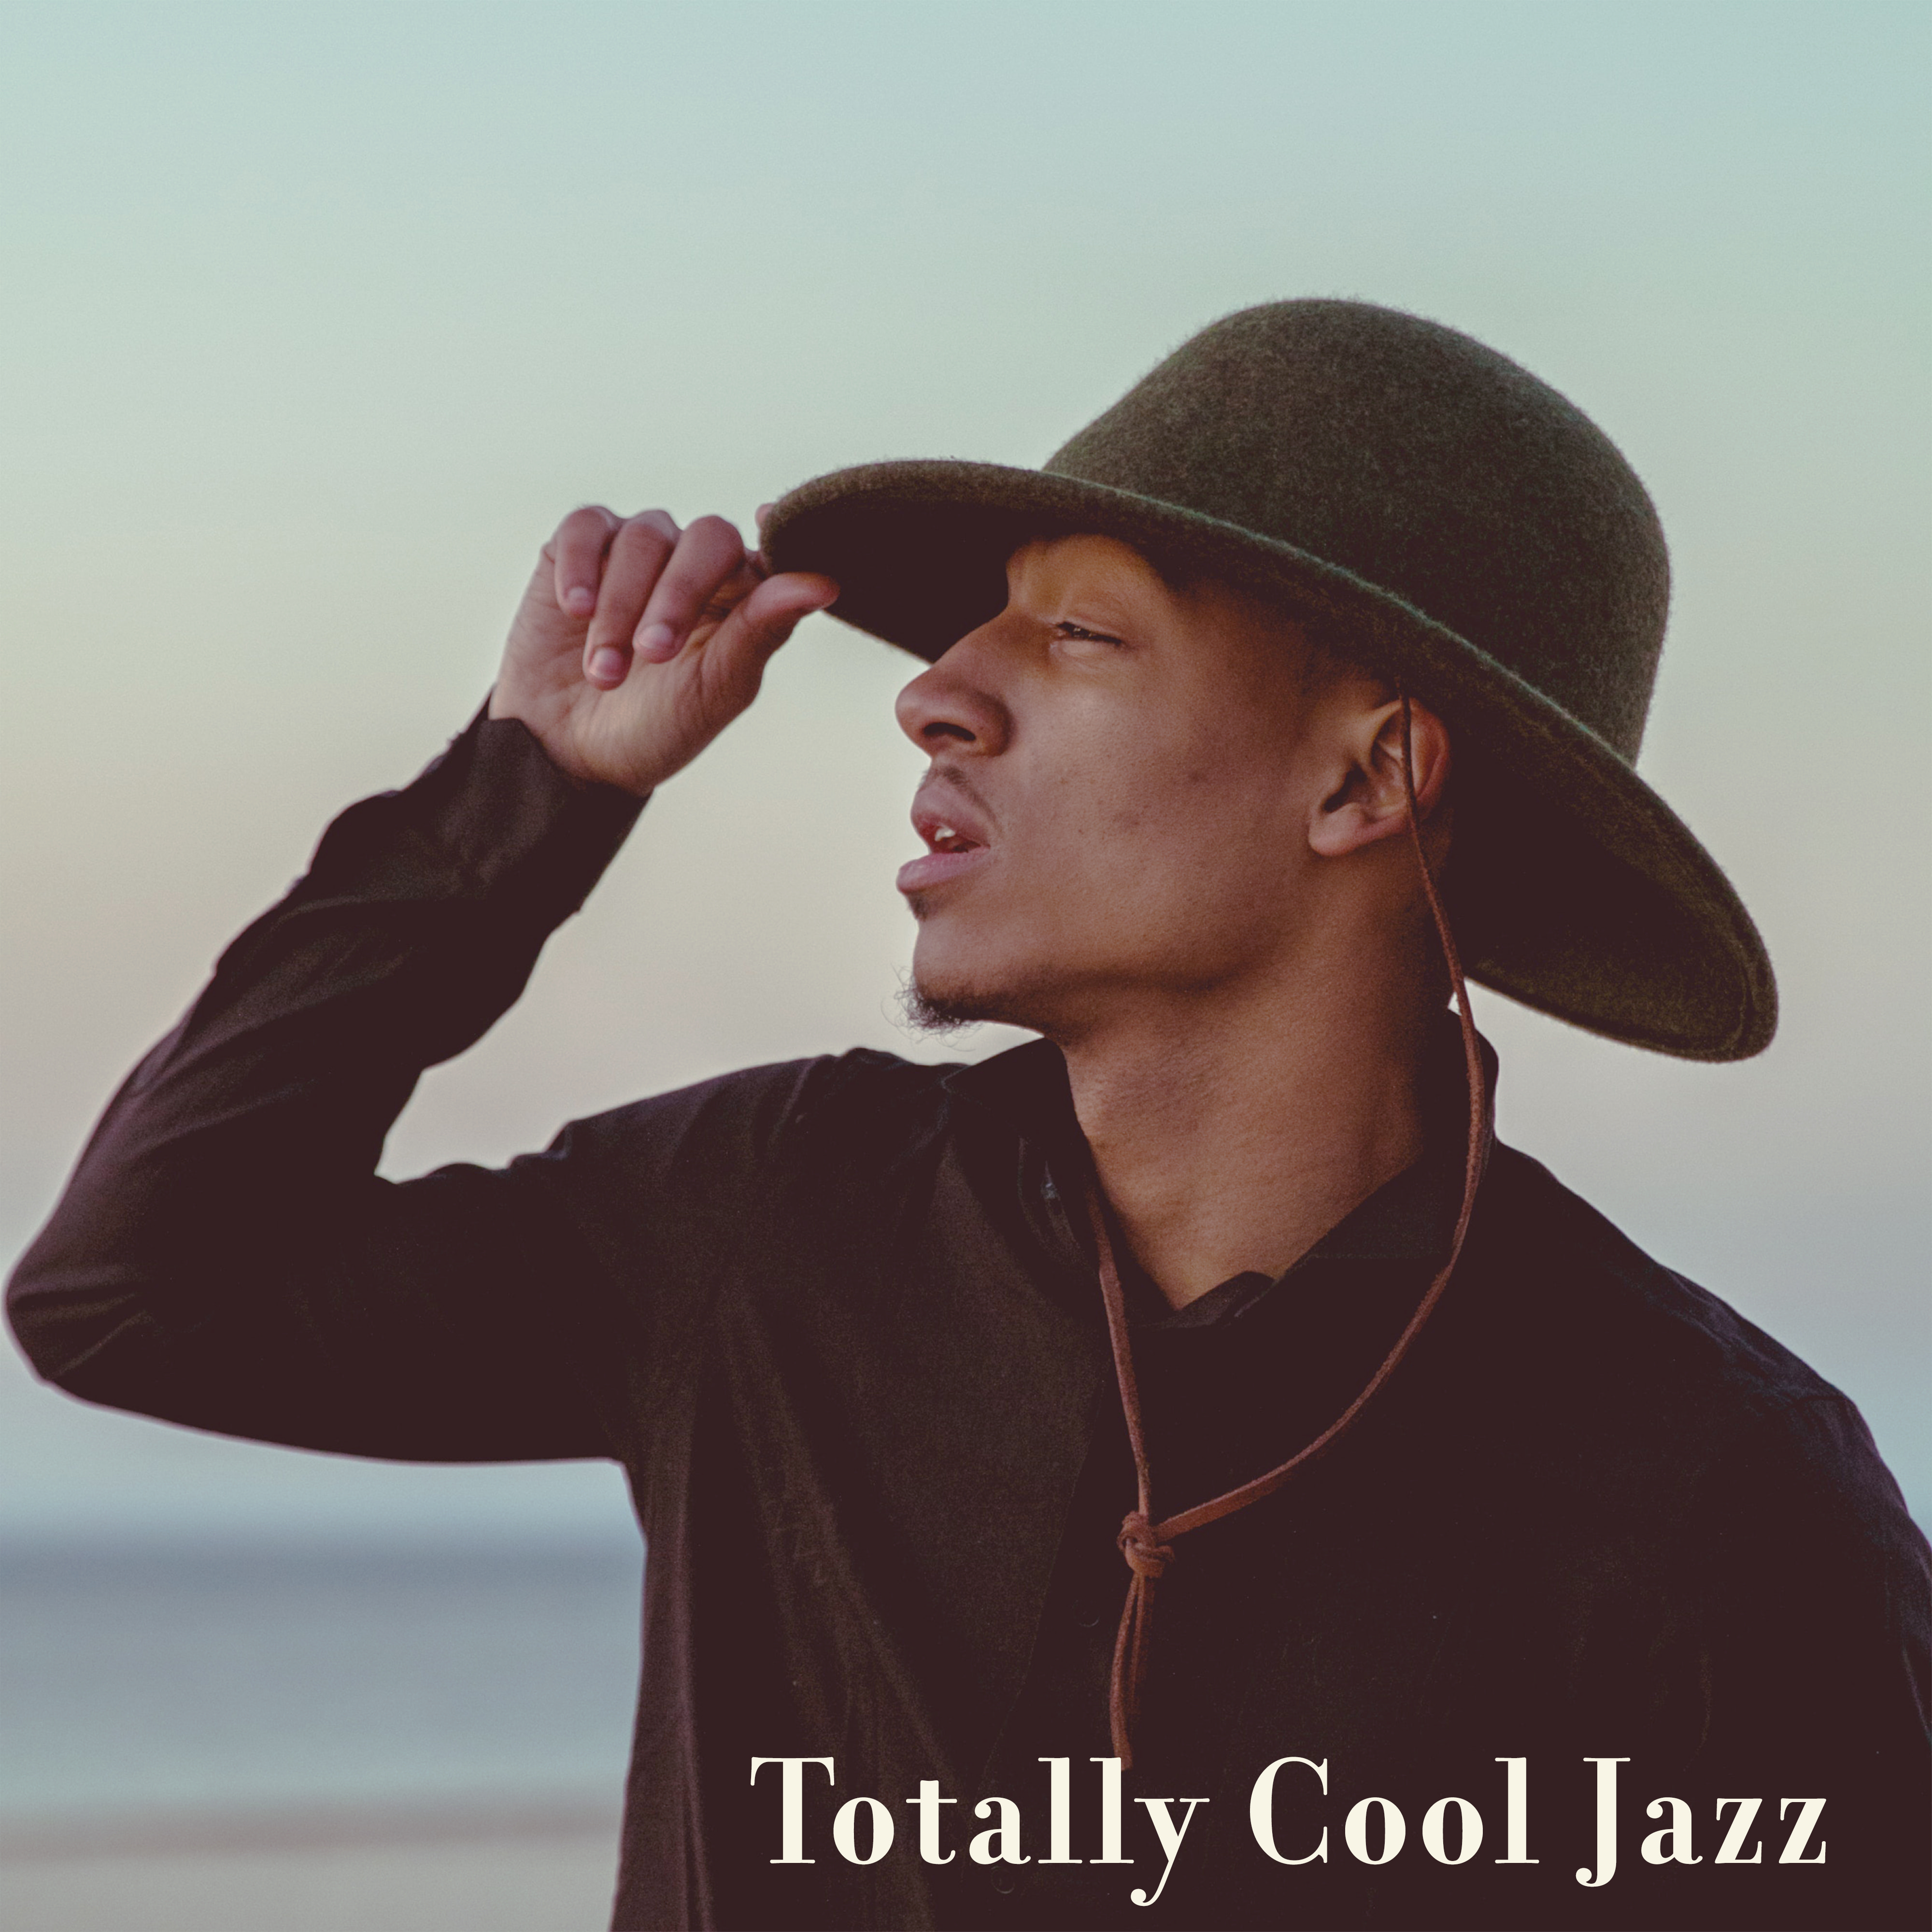 Totally Cool Jazz – Relaxing Jazz Sounds for Evening Relaxation, Long Conversations or as Background Music during a Meeting with Friends